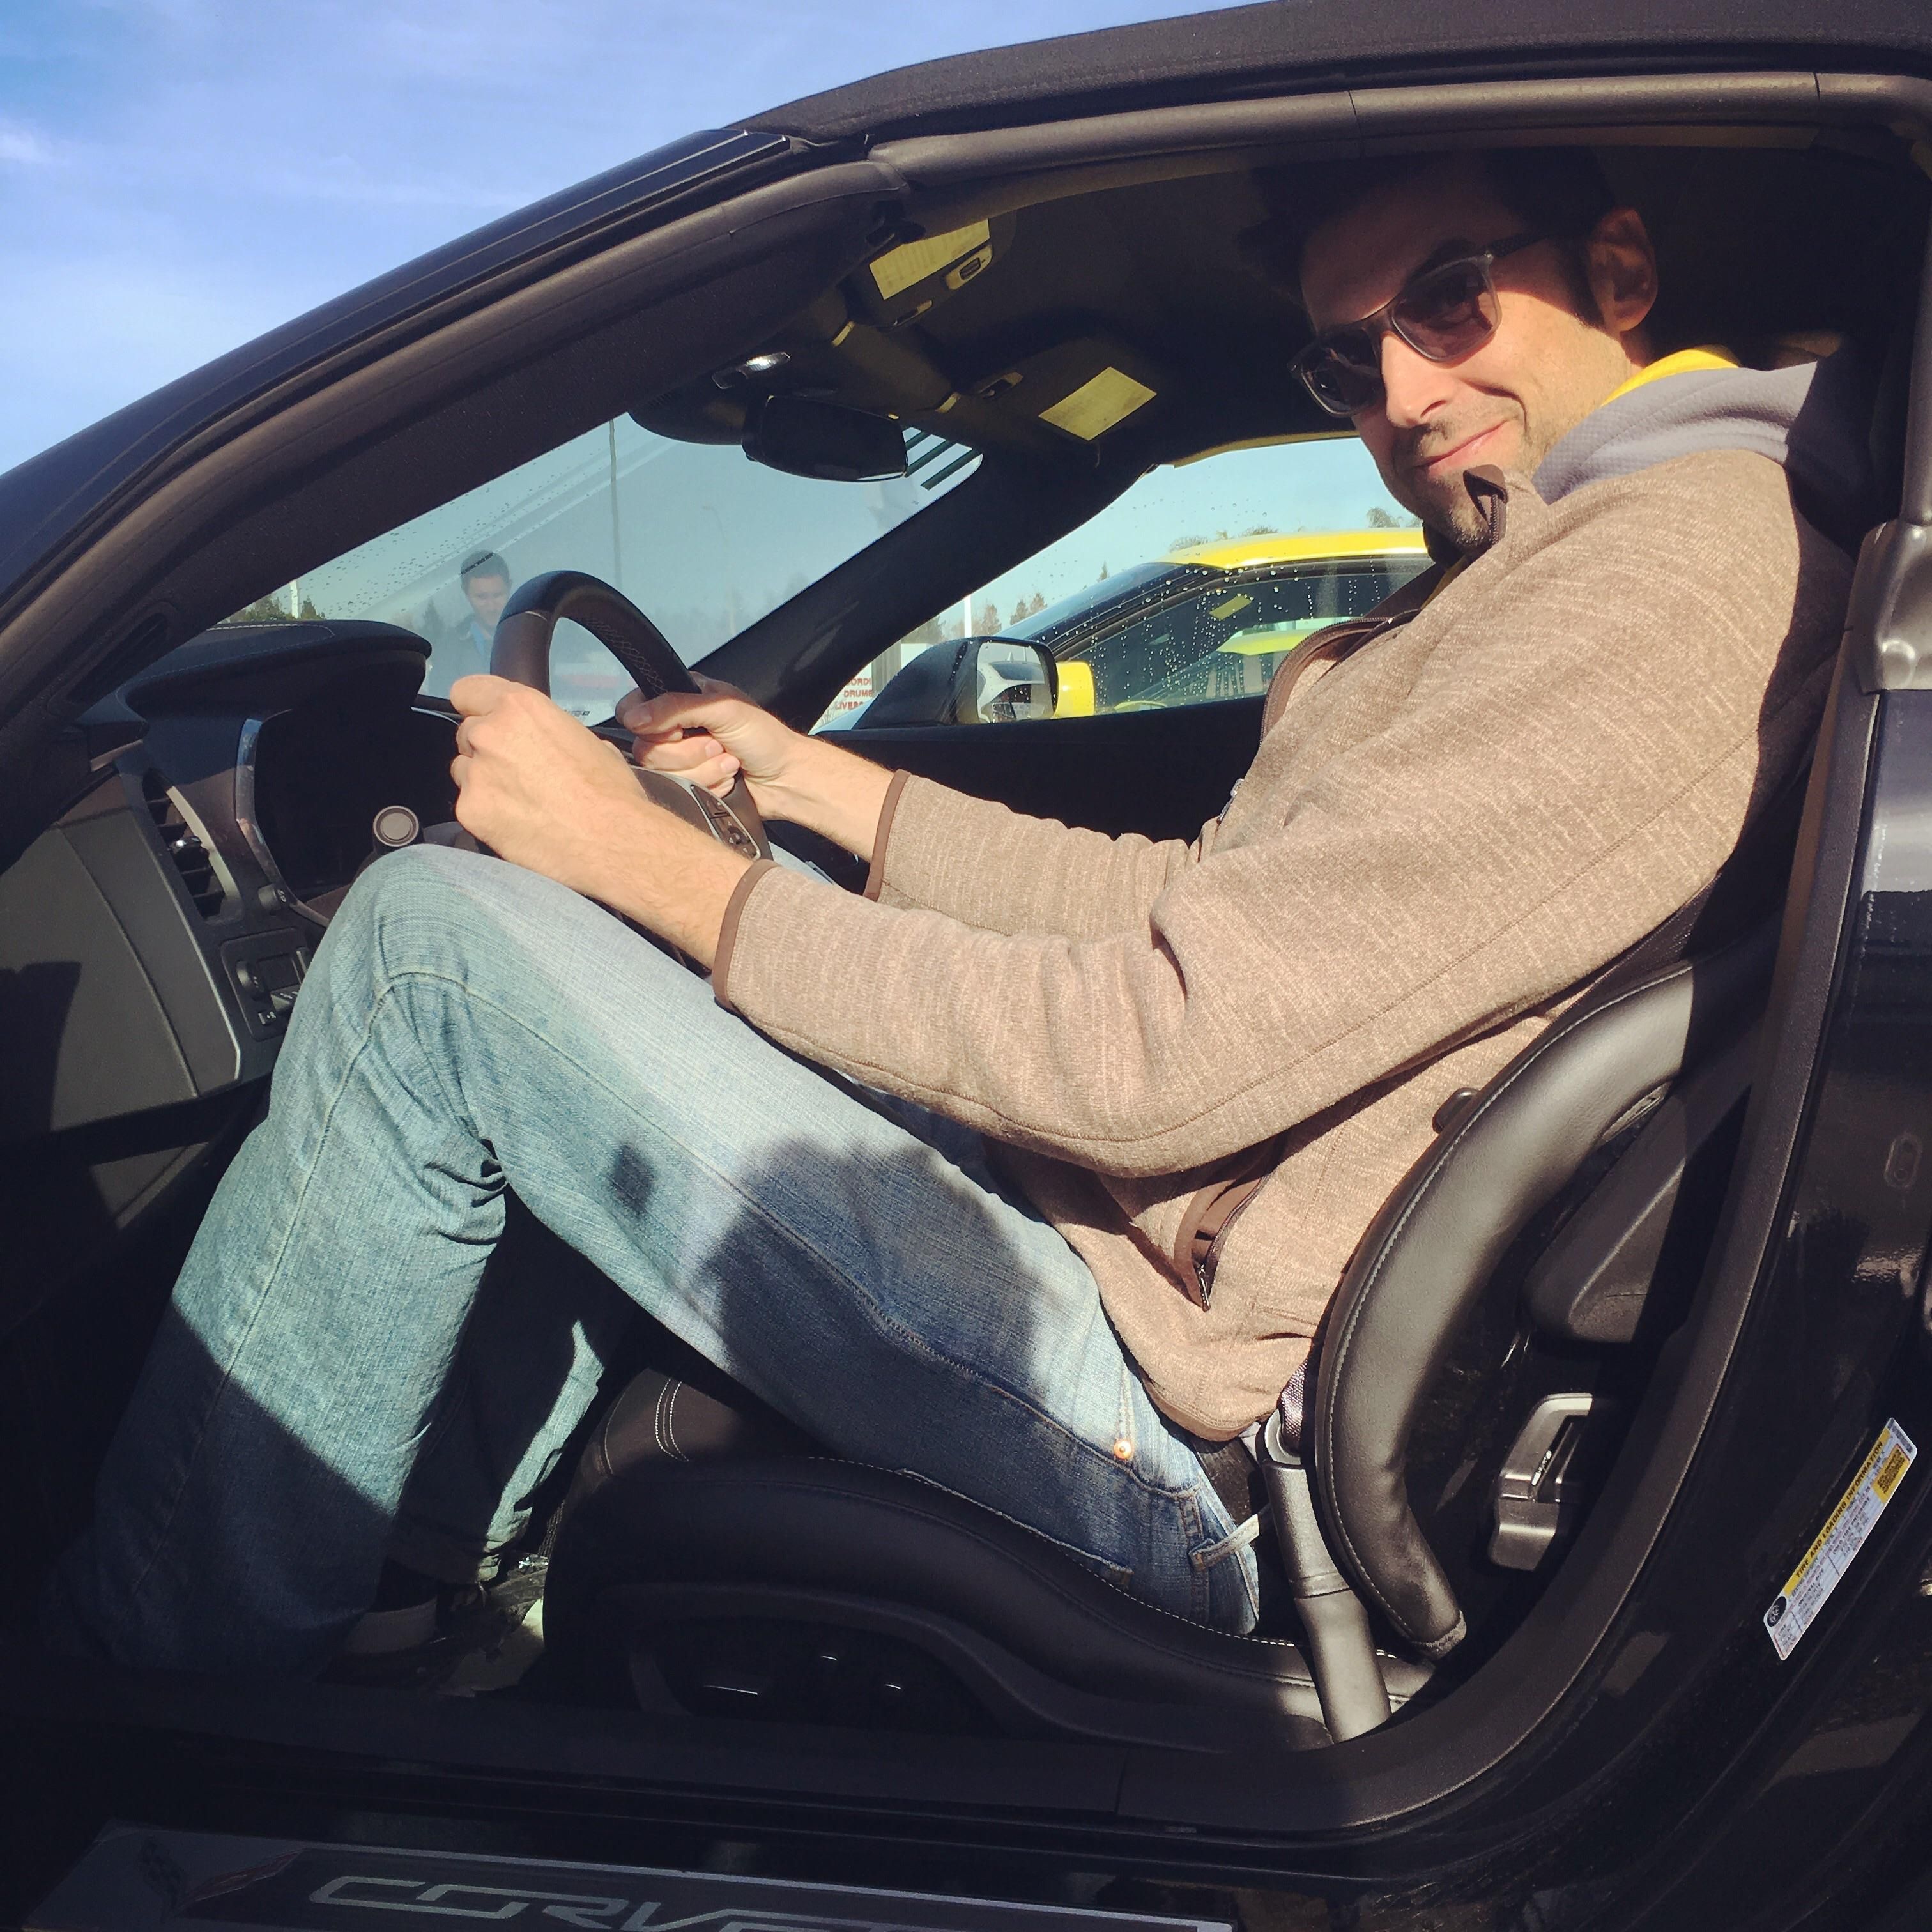 This is how I fit into a brand new corvette. Shin and head angle were brutal. The salesman was laughing his ass off and snapped this pic